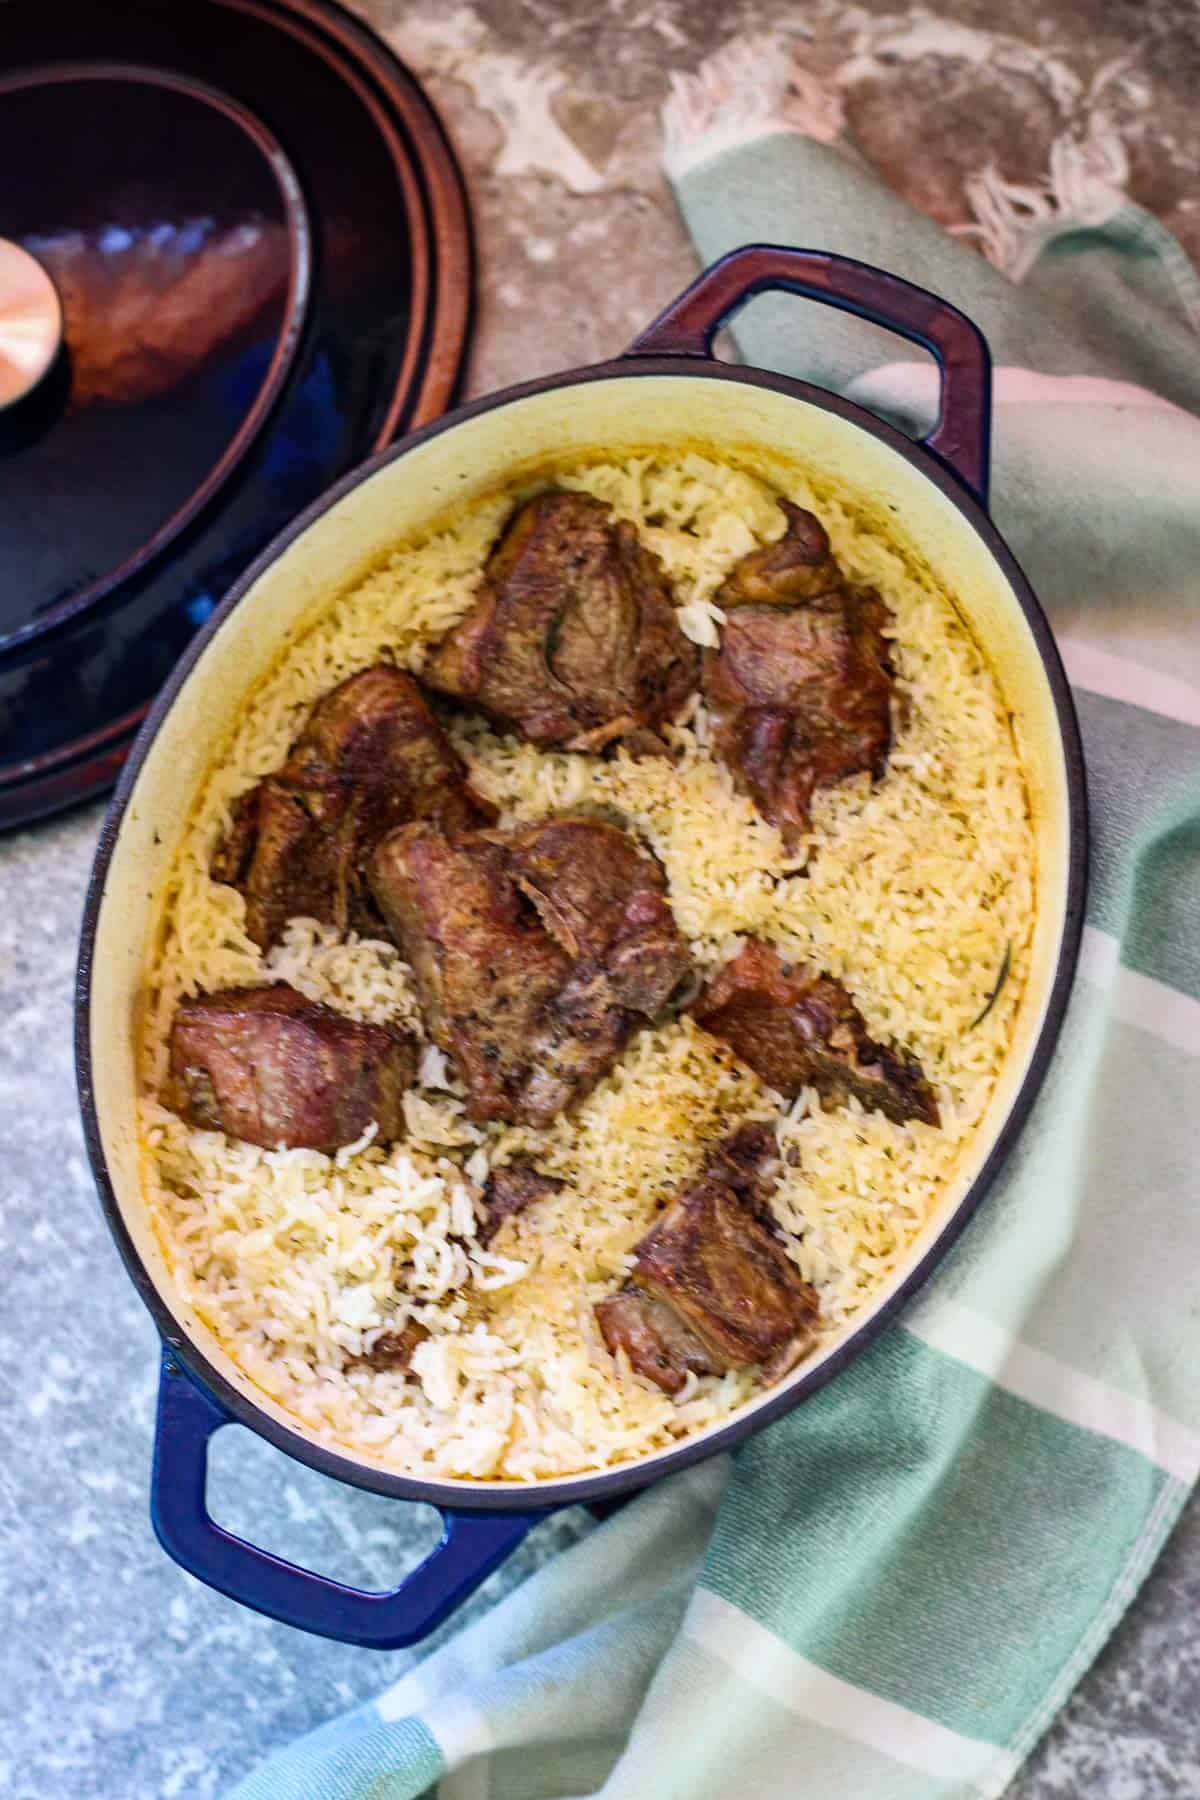 Baked lamb and rice on a Dutch oven, lid is on the side and a towel on the other side of the dish.